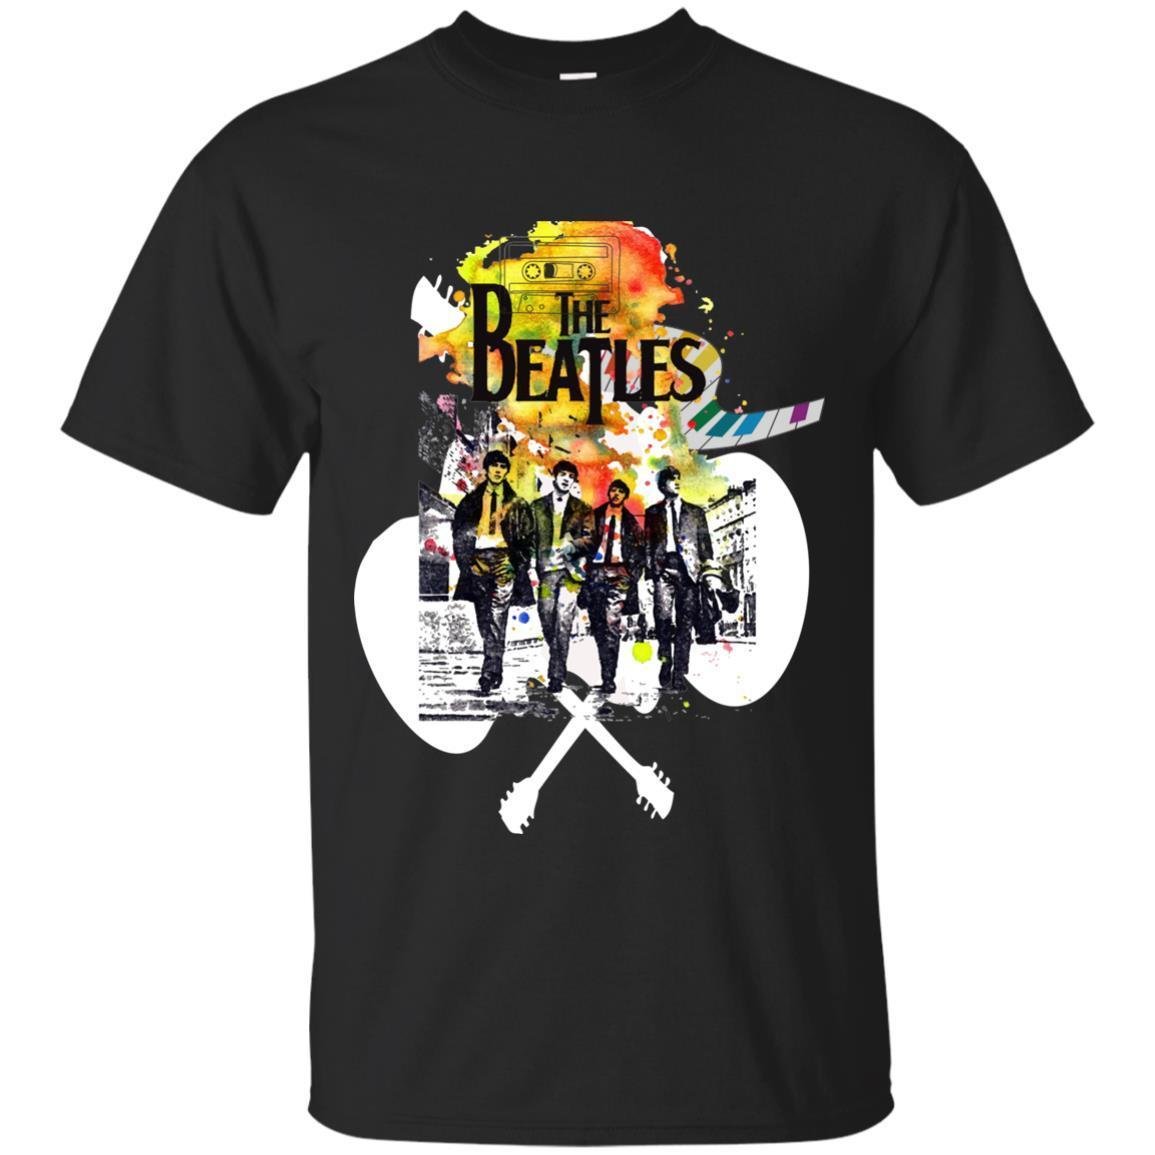 NEW The Beatles Band BLACK T Shirt Super Fast Shipping